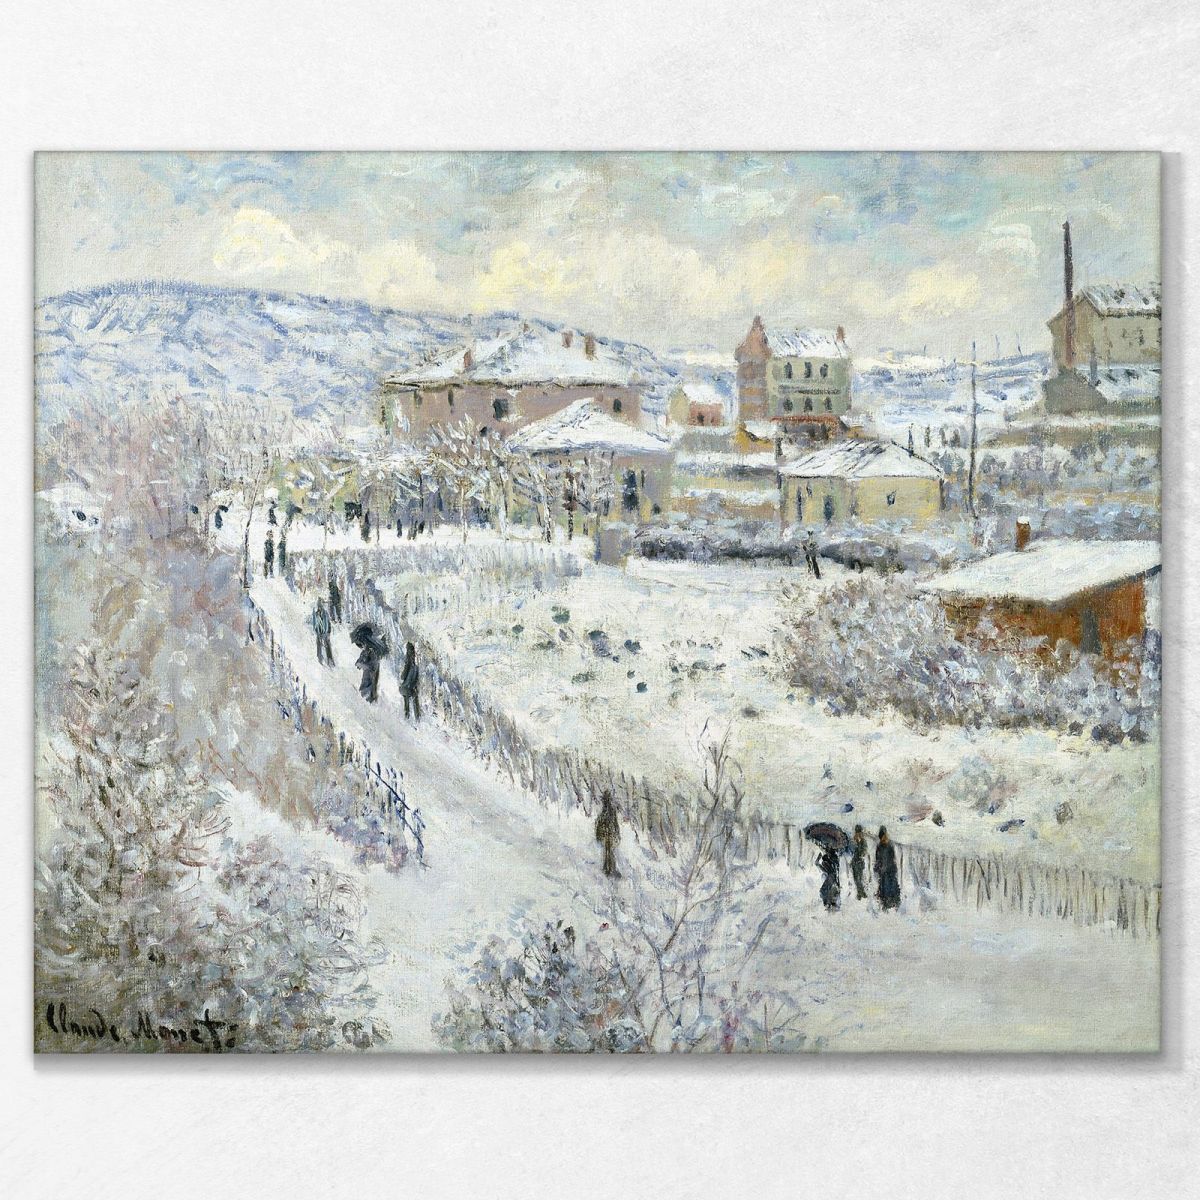 View Of Argenteuil In The Snow, 1875 Monet Claude canvas print mnt106